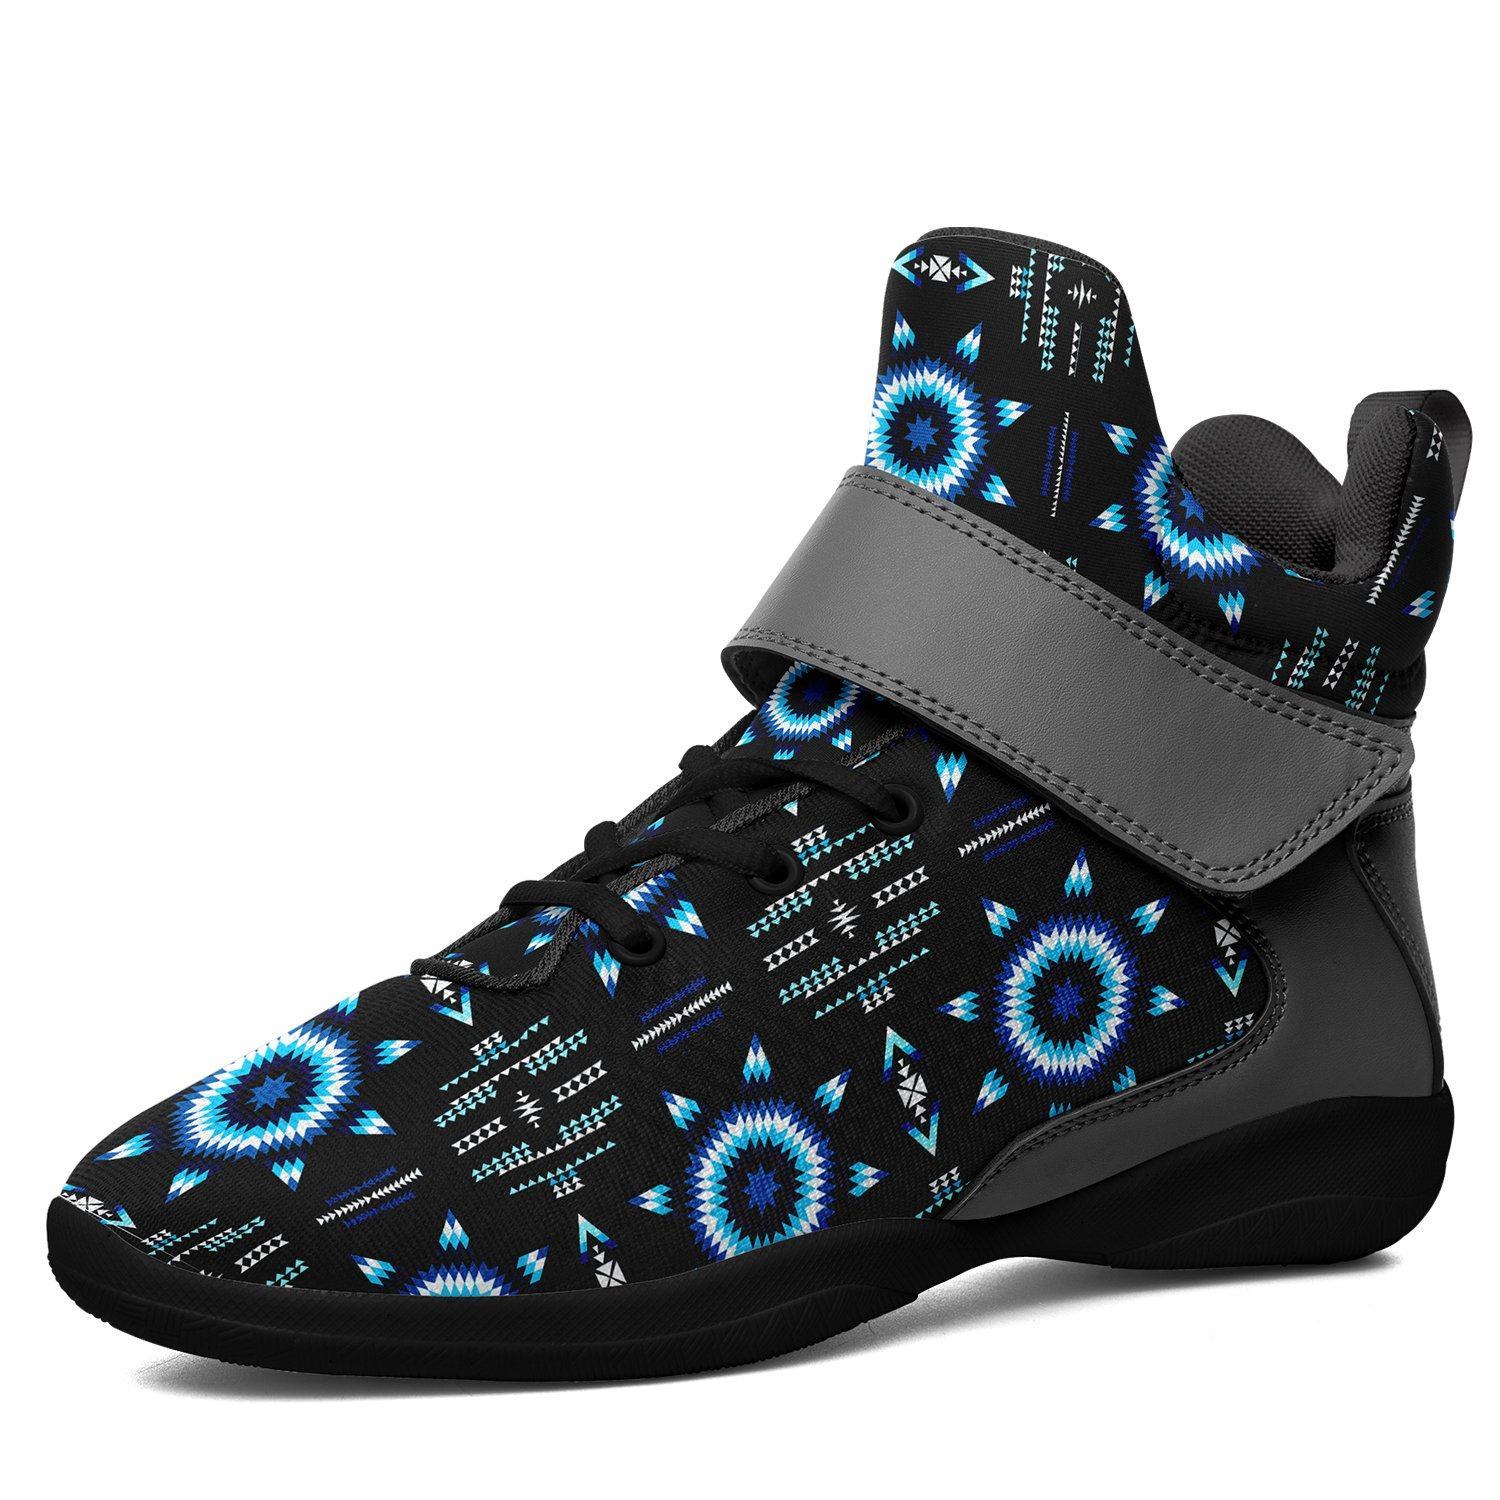 Rising Star Wolf Moon Kid's Ipottaa Basketball / Sport High Top Shoes 49 Dzine US Child 12.5 / EUR 30 Black Sole with Gray Strap 